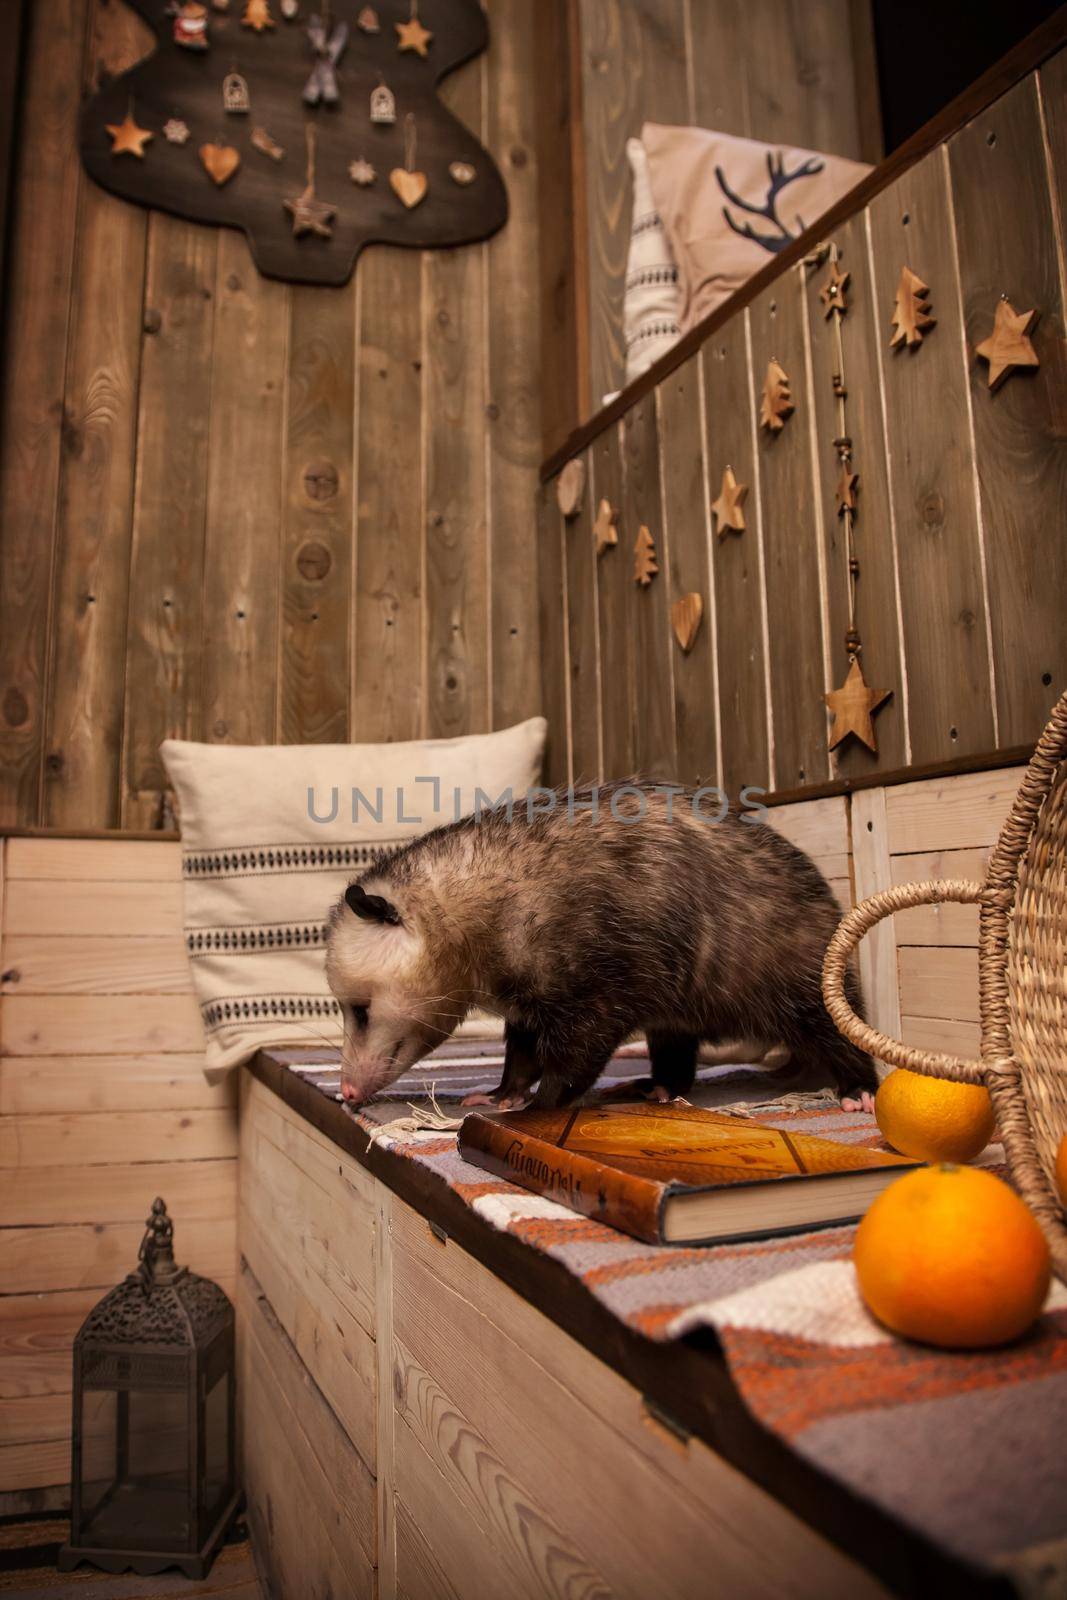 The Virginia or North American opossum, Didelphis virginiana in decorated room with Christmass tree. New Years celebration.